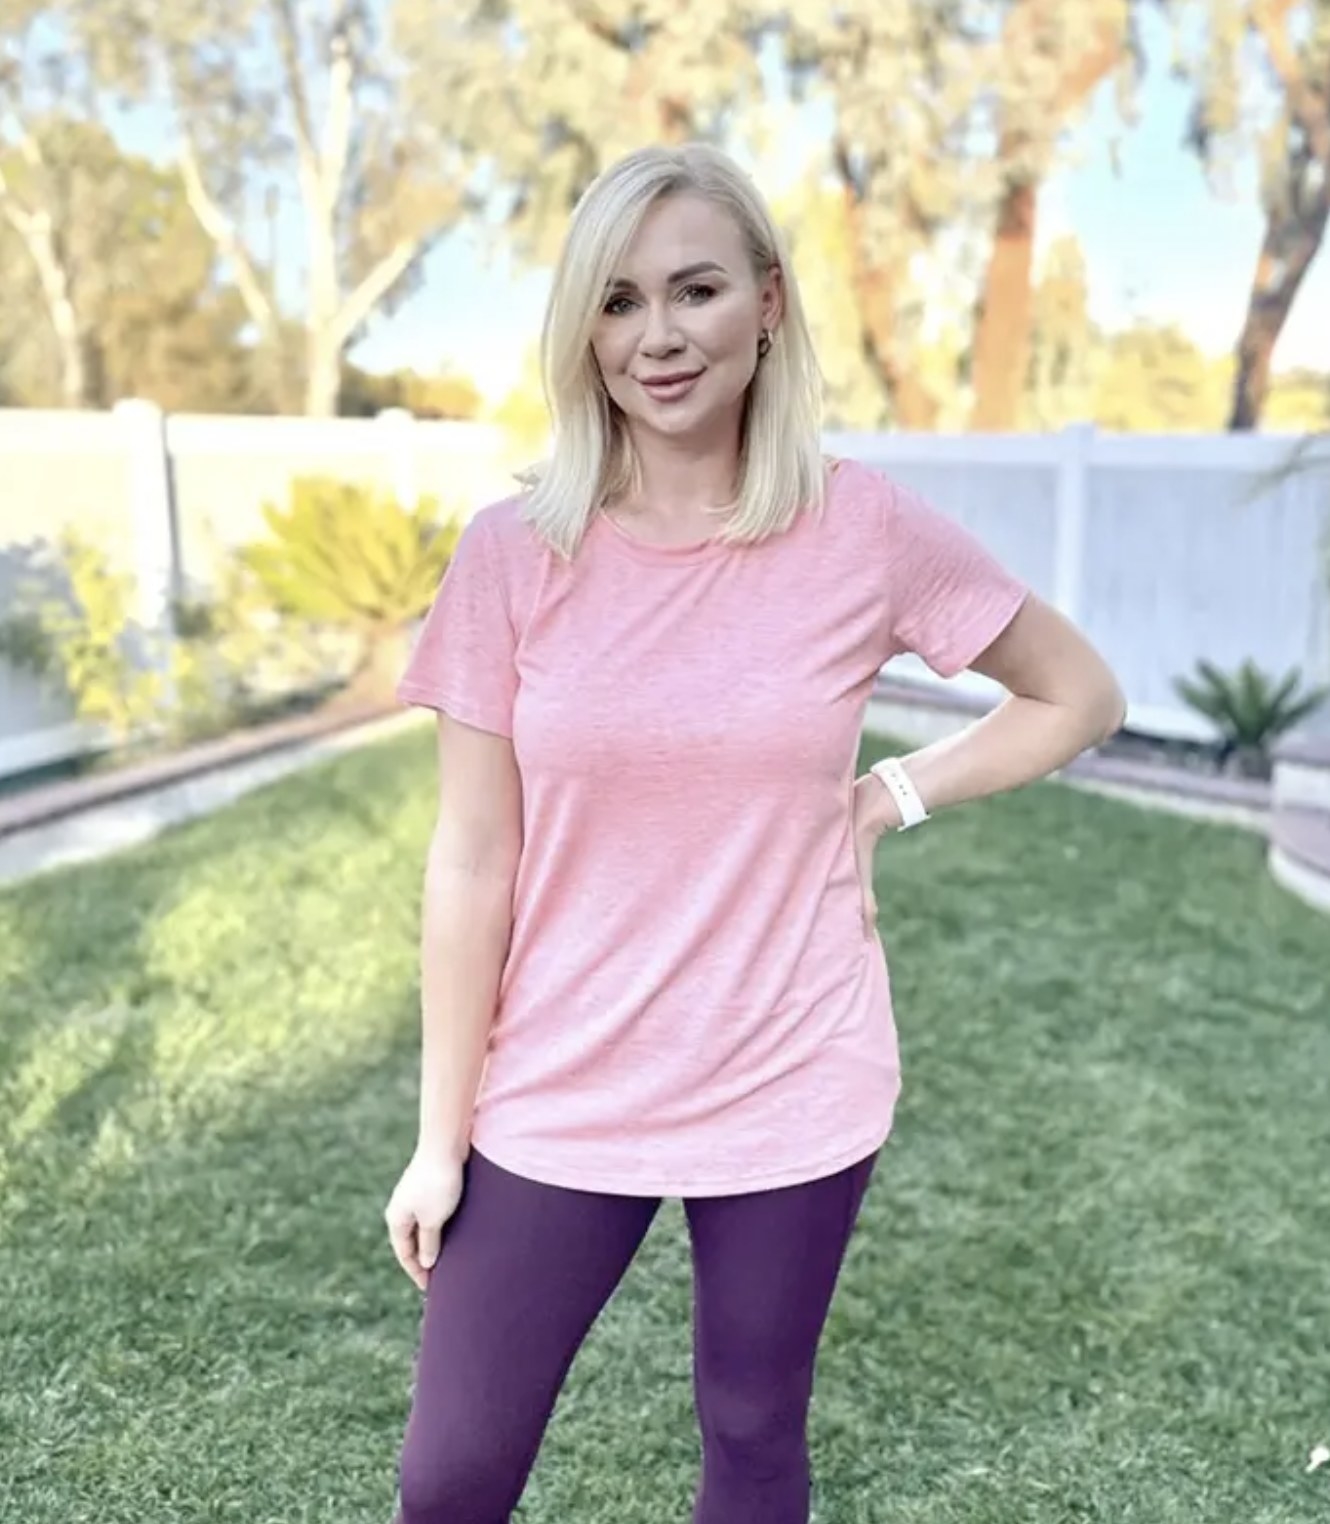 Person is wearing a pink T-Shirt and purple leggings